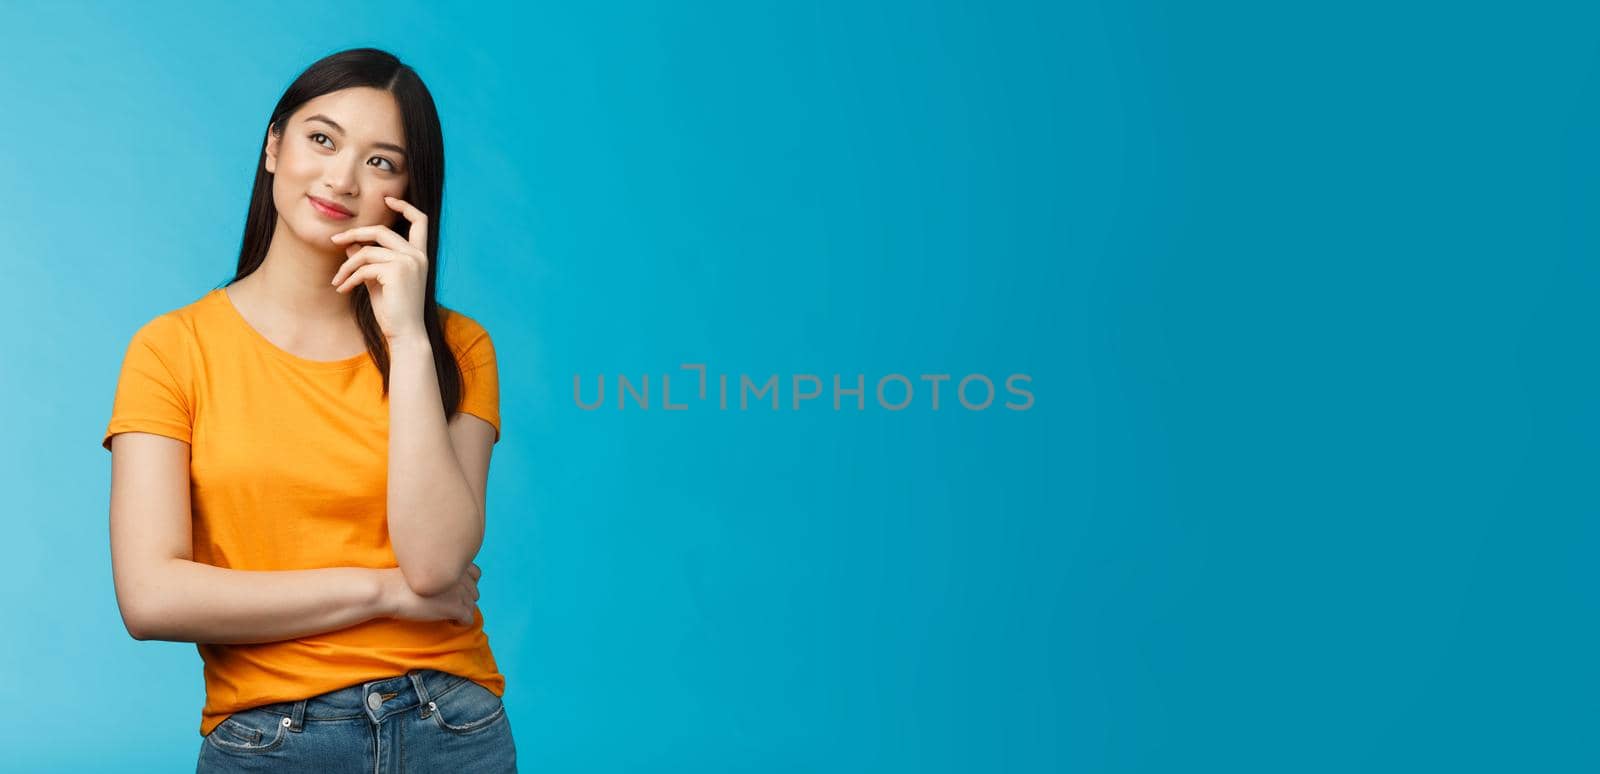 Joyful confident asian girl with dark haircut tilt head, dreaming, imaging interesting plan, smiling cunning, have idea, thinking and making choice, look up thoughtful, stand blue background.